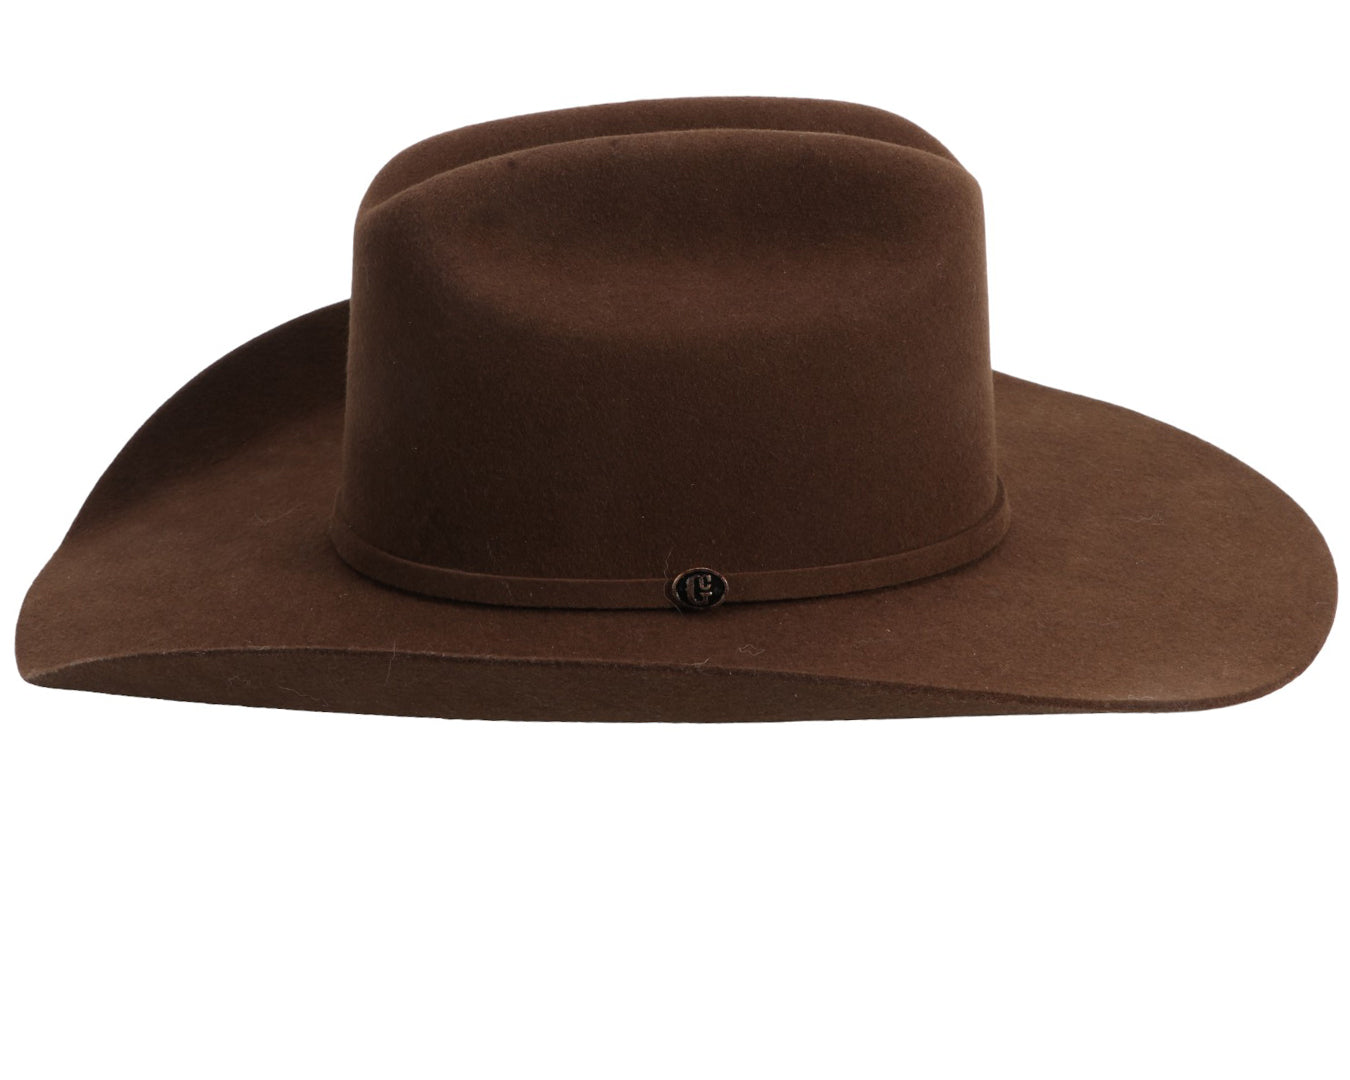 Gone Country Hats - Yellowstone Cowboy Hat